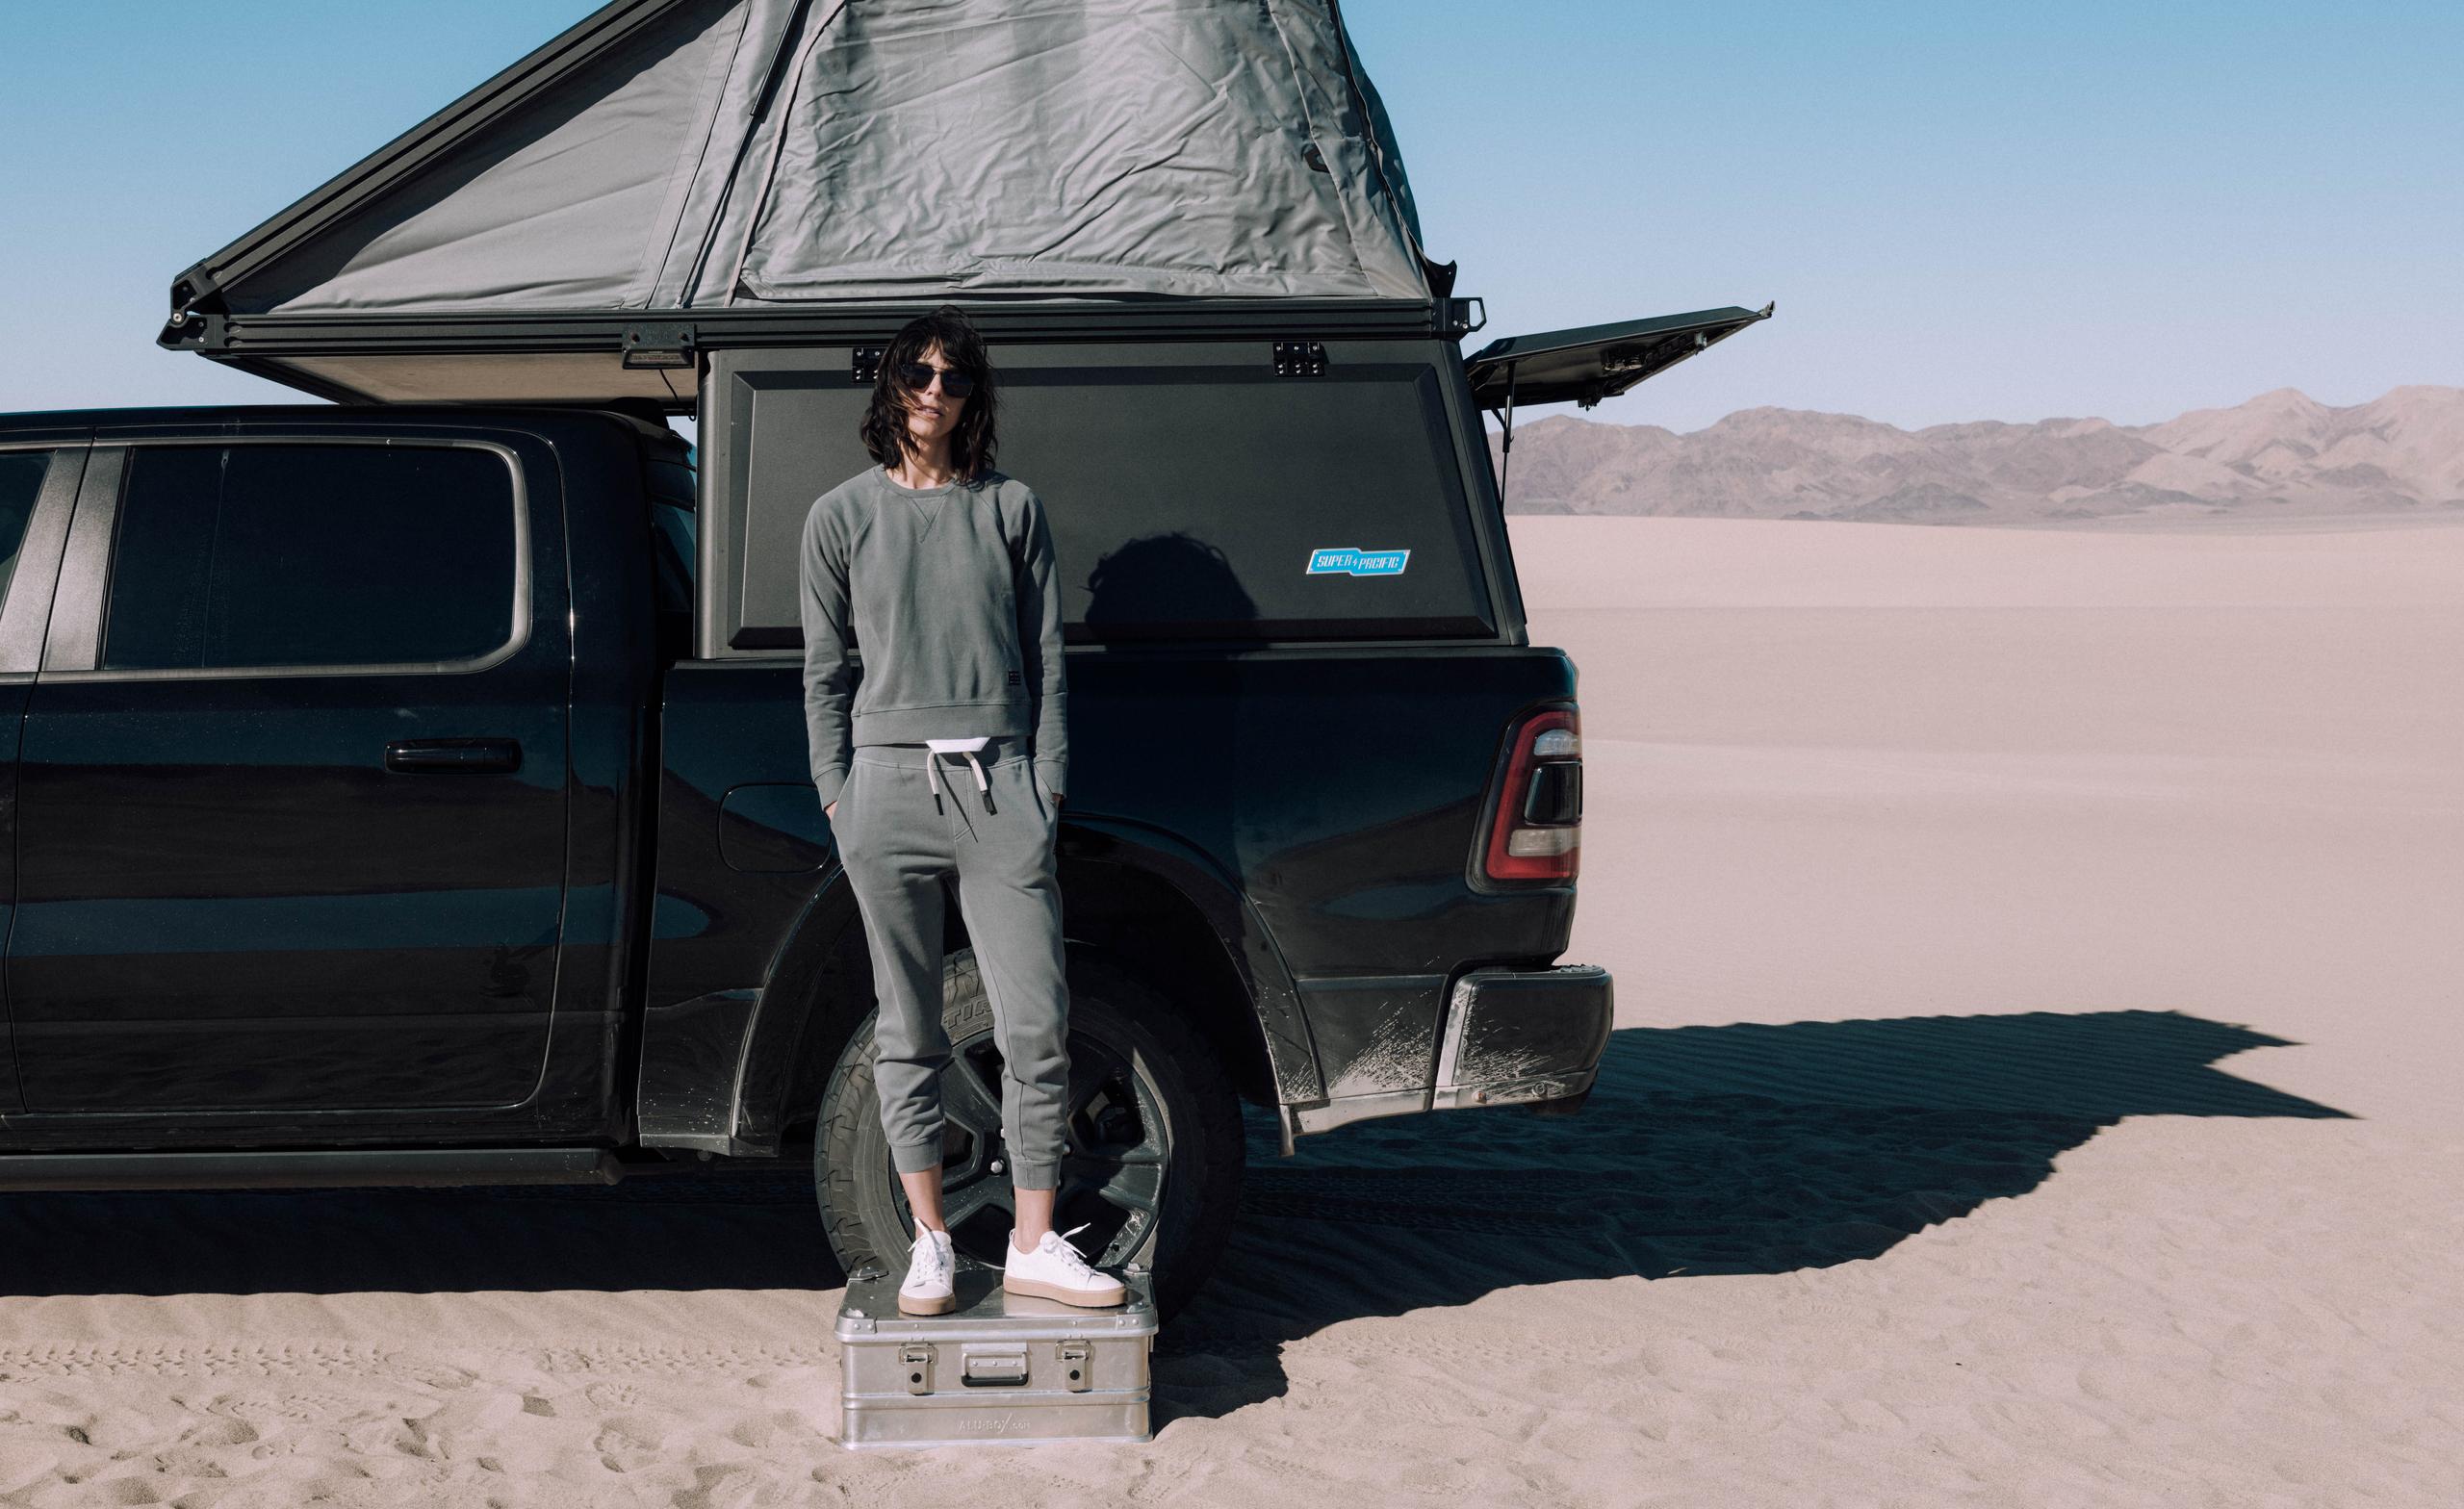 A girl in Solstice Lightweight Raglan Pullover standing in front of a camper truck.